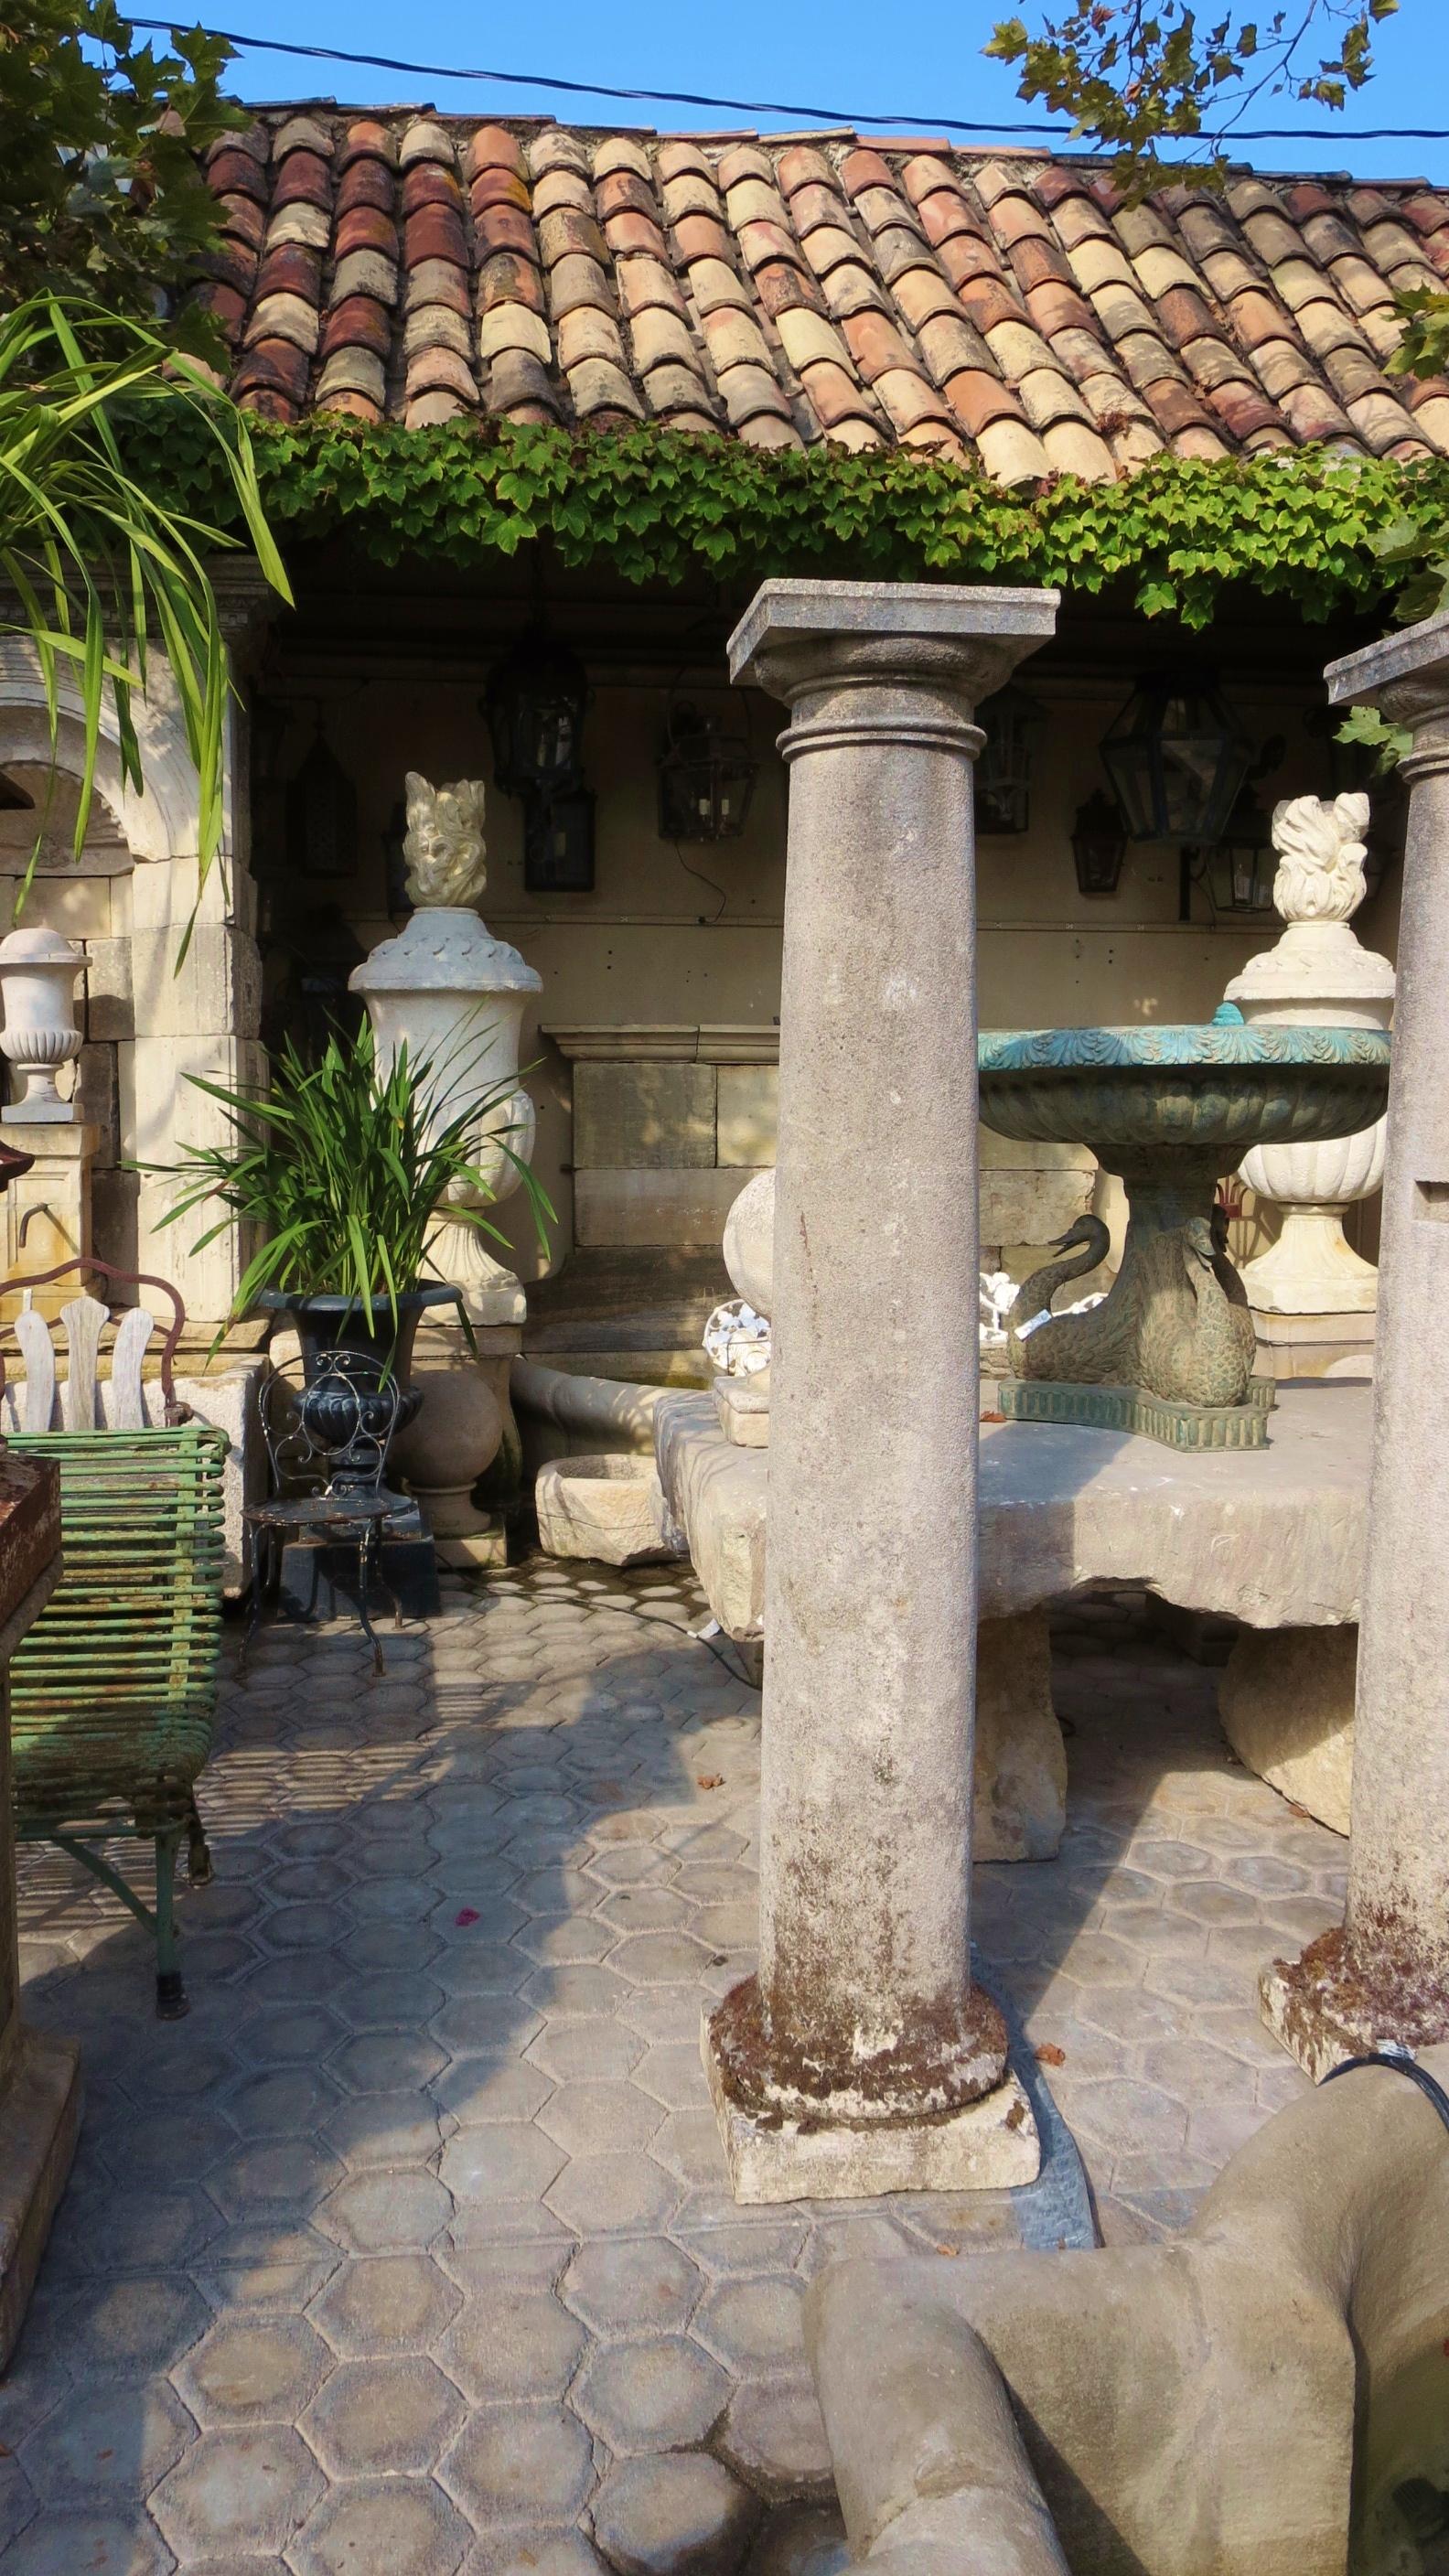 Nicely hand carved total of five available 18th century stone columns sitting on base square pedestal.
Could be sold as a single column to be placed in a garden as an architectural decorative element, focal point or to top it with a finial or mount